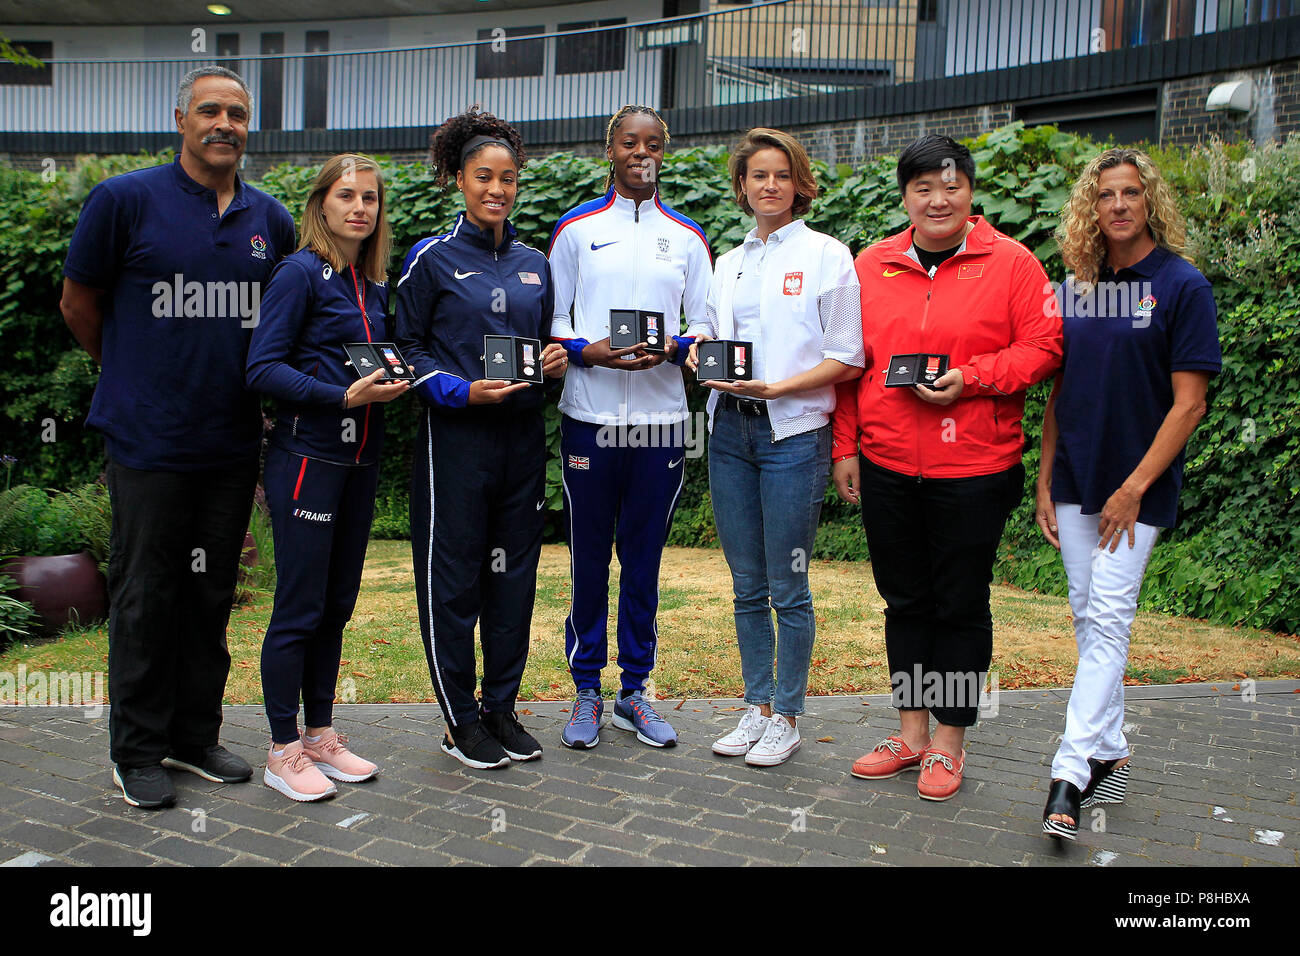 London, UK. 11th July, 2018. Lorraine Ugen of Great Britain ©, Queen Harrison of the USA (2L), Ninon Guillon-Romarin of France (1L), Anna Jagaciak-Michalska of Poland (1R) and Gong Lijiao of China (2R) pose with their medals with Daley Thompson (1L) and Sally Gunnell (3R).  all the athletics world cup team captains, all Women, today are presented with unique Platinum captain's medals marking 100 years since first British women secured the right to vote. Credit: Andrew Orchard sports photography/Alamy Live News Stock Photo